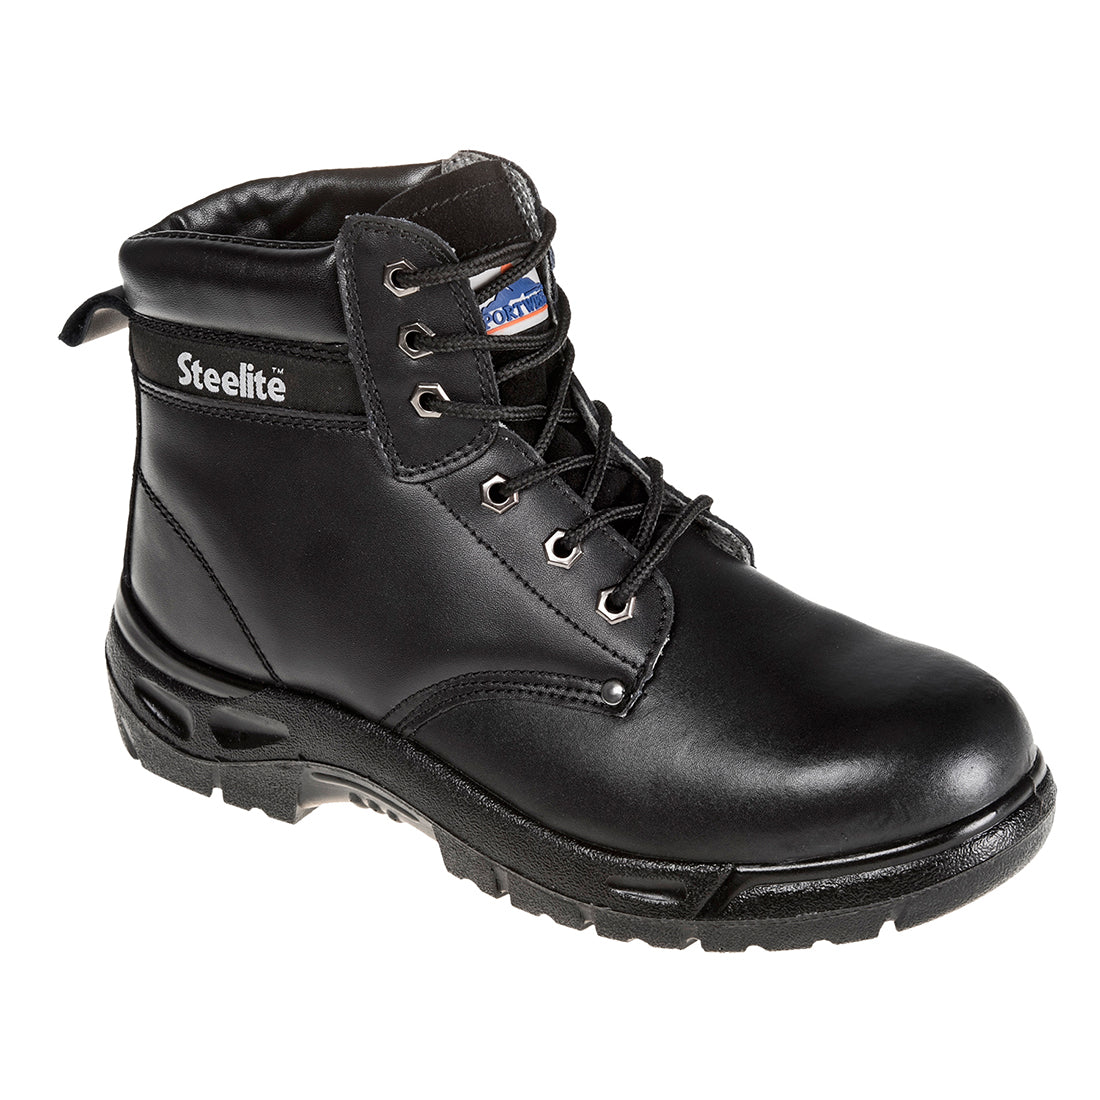 PORTWEST SIZE 4 / 37 FW03 Black Steelite Boot S3 Steel toe safety boot rigger